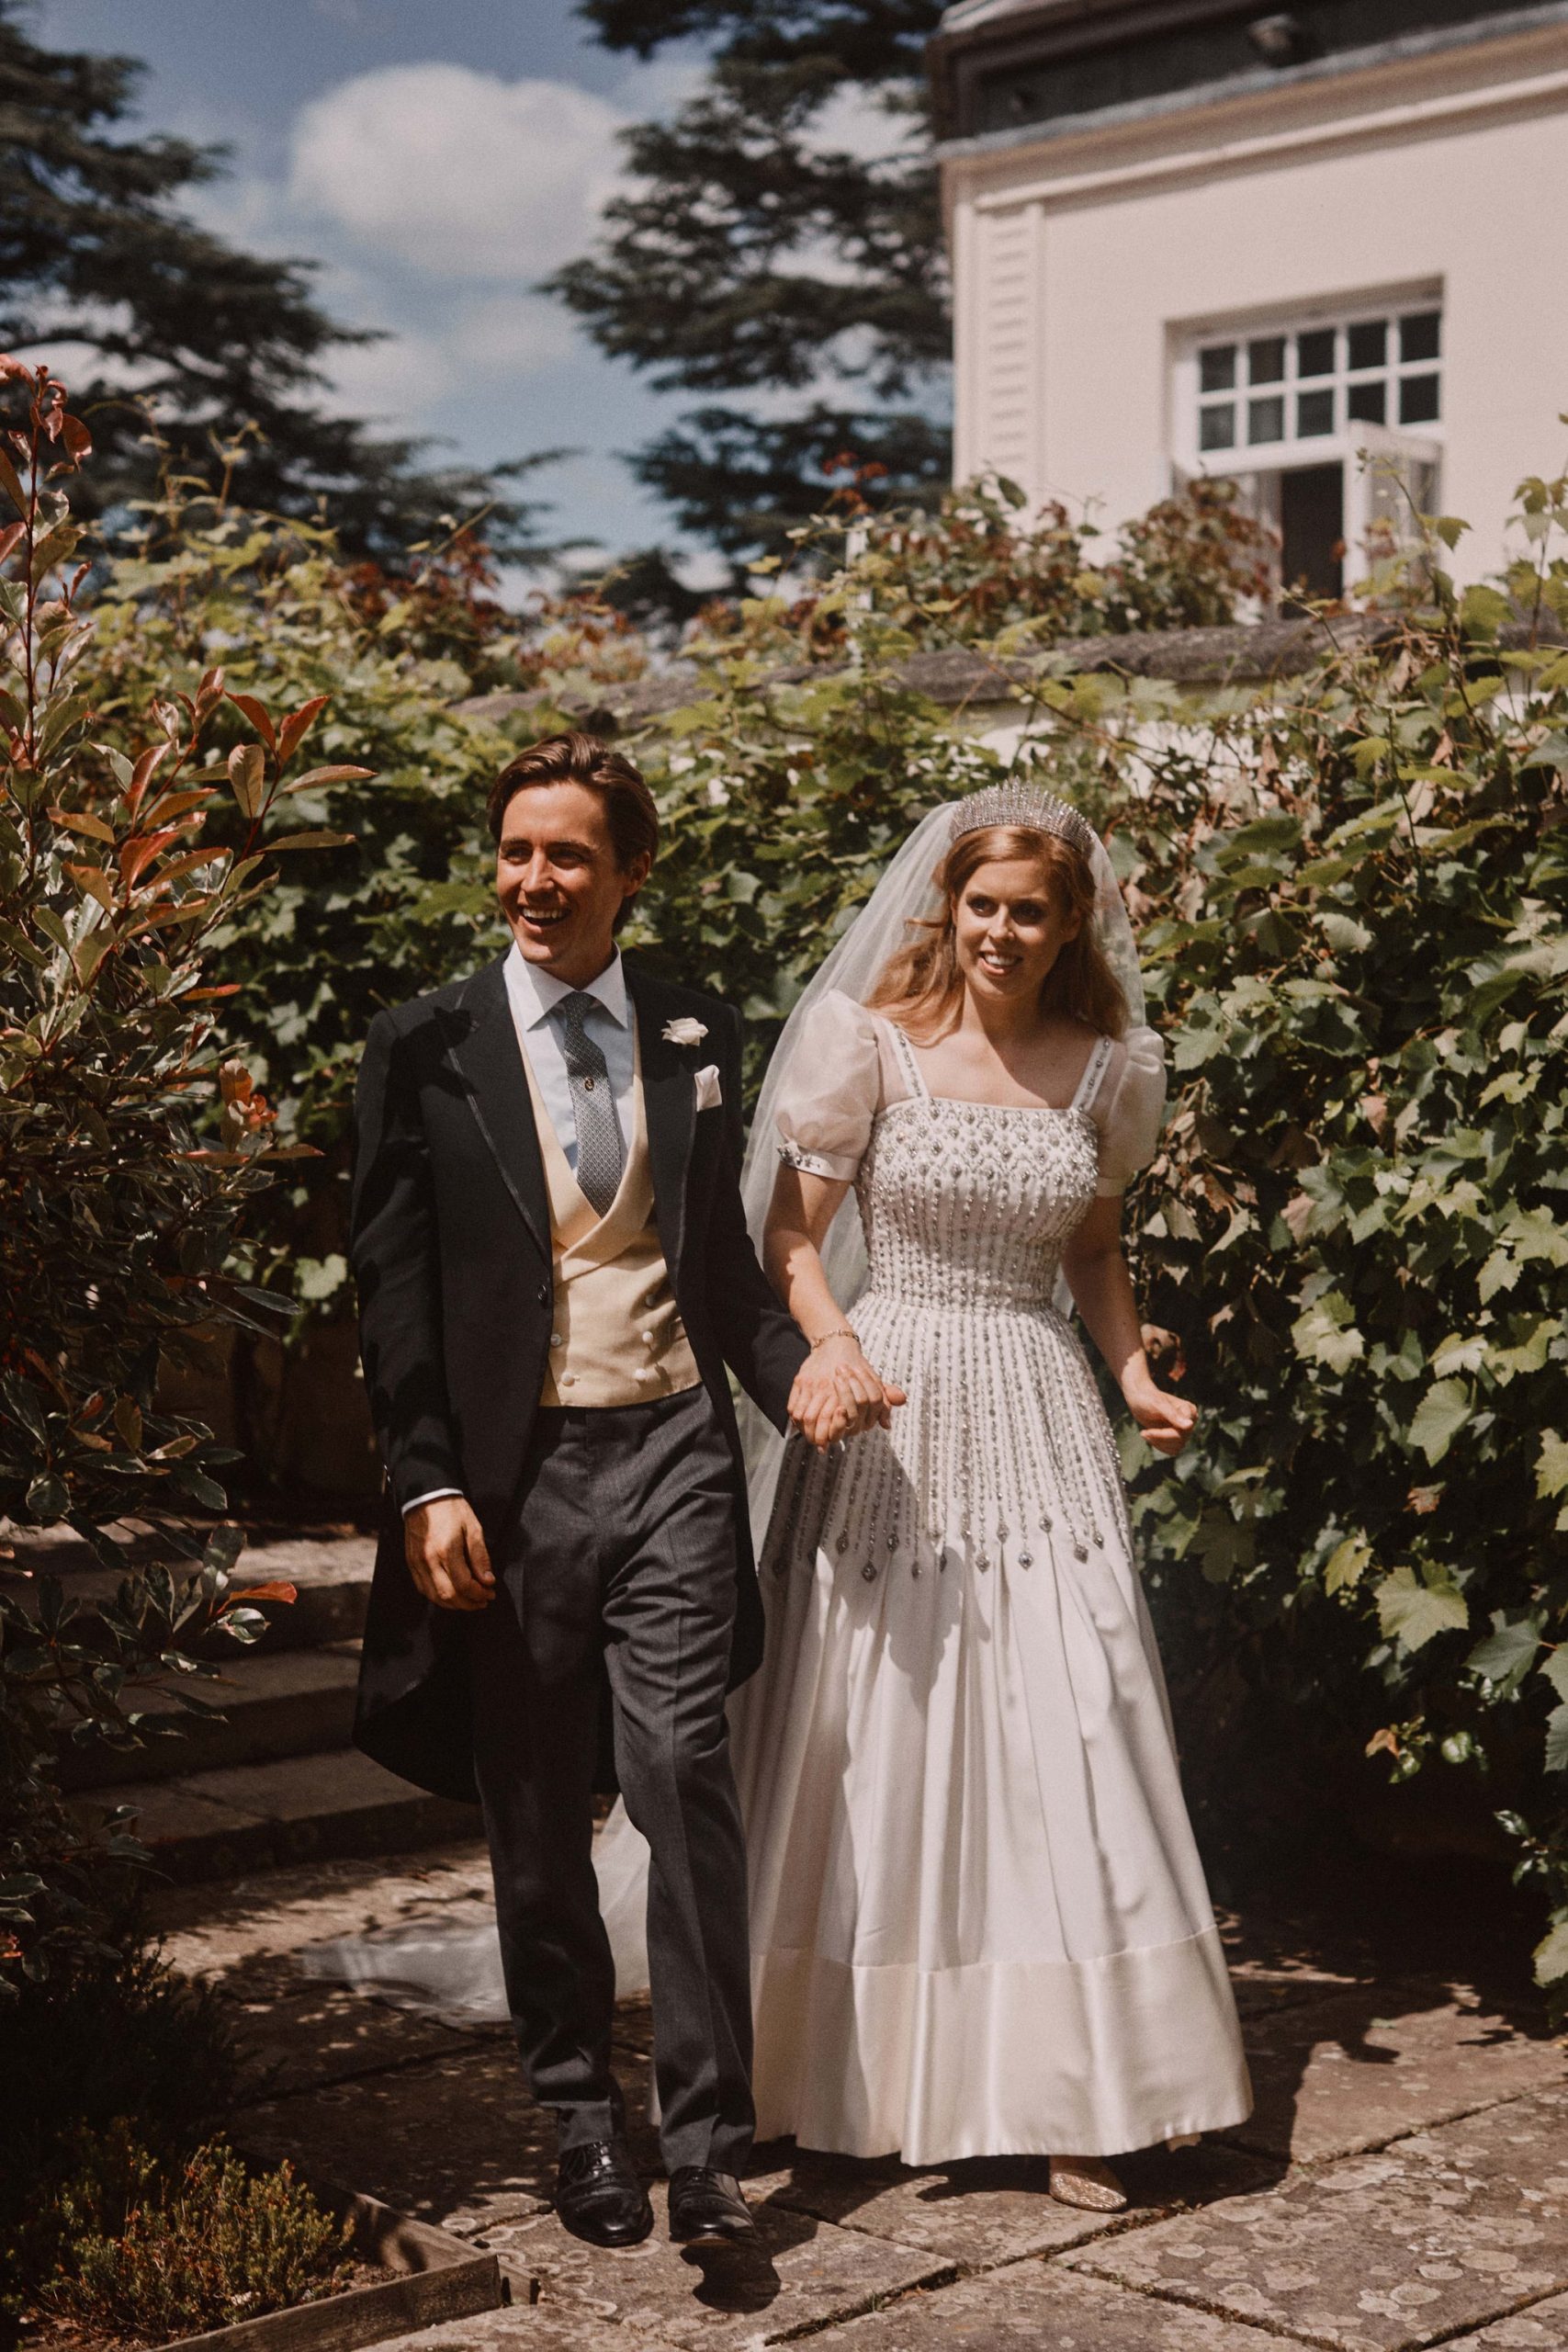 Princess Beatrice’s Wedding Dress, Loaned From the Queen, Will Be on Display at Windsor Castle